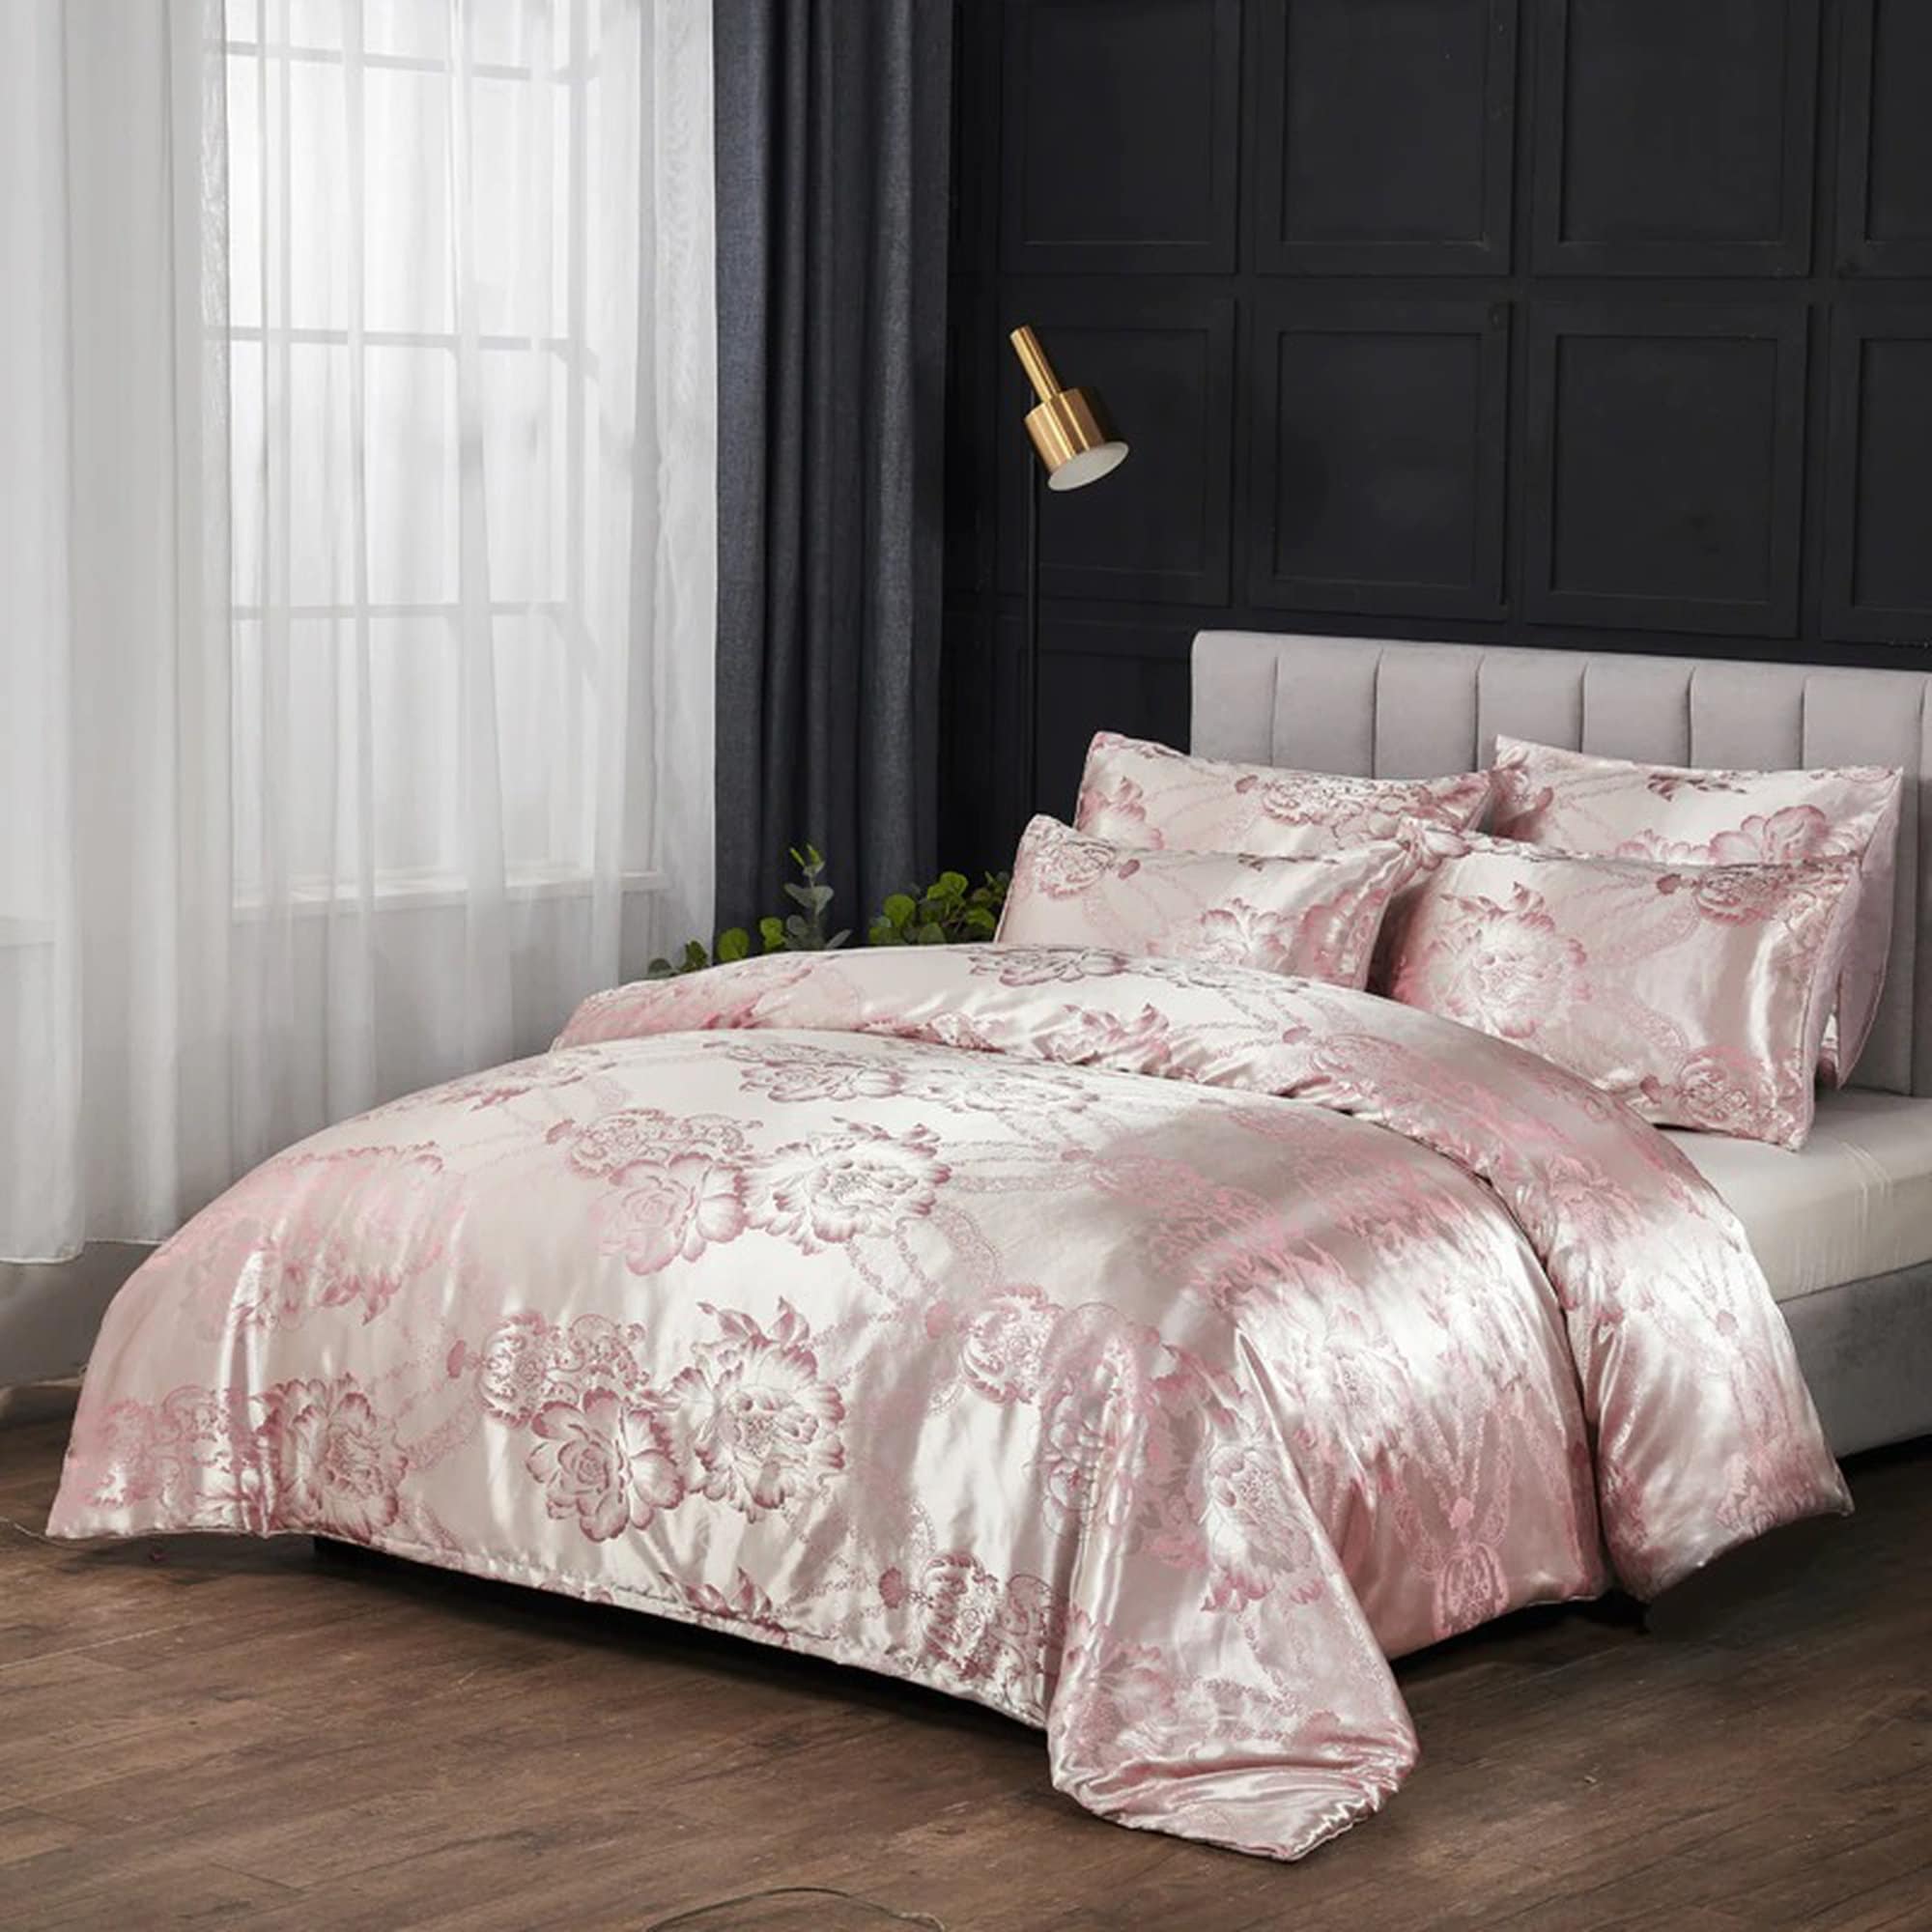 daintyduvet Luxury Baby Pink Bedding made with Silky Jacquard Fabric, Damask Duvet Cover Set, Designer Bedding, Aesthetic Duvet King Queen Full Twin